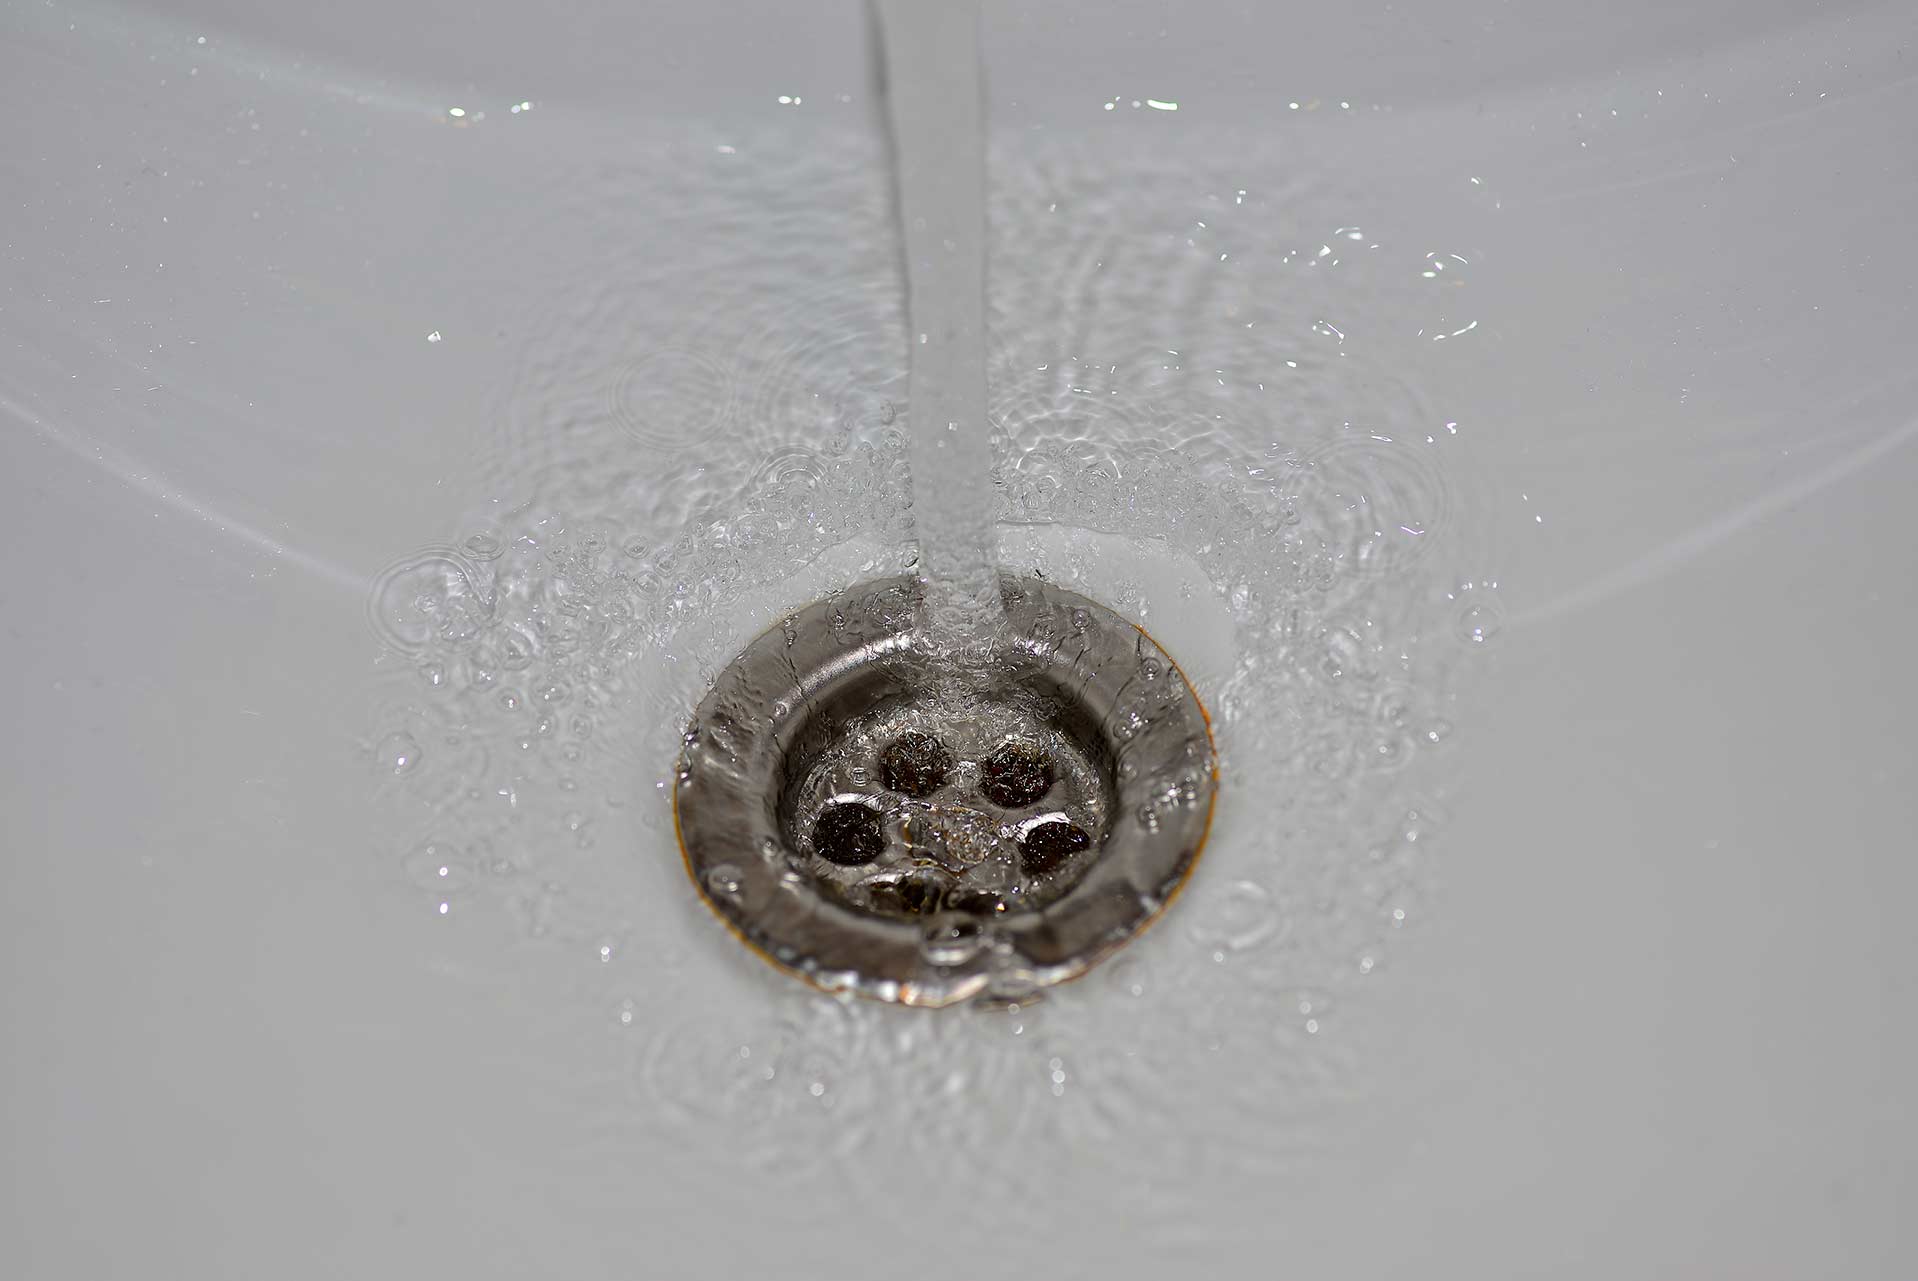 A2B Drains provides services to unblock blocked sinks and drains for properties in Spennymoor.